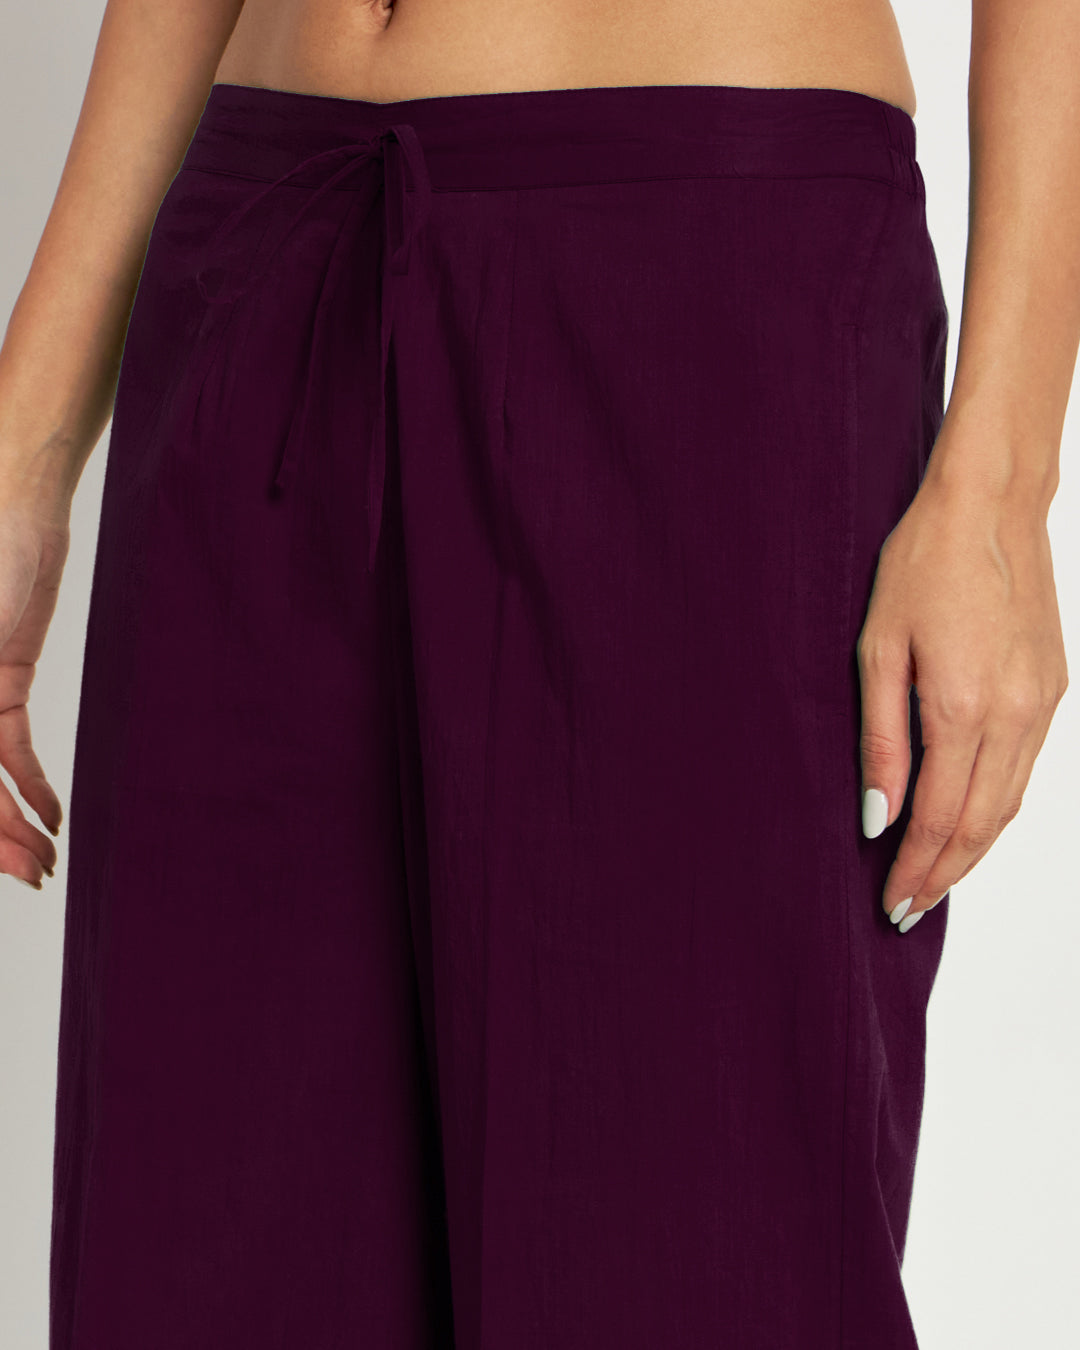 Plum Passion Sleeveless A-Line Solid Co-ord Set